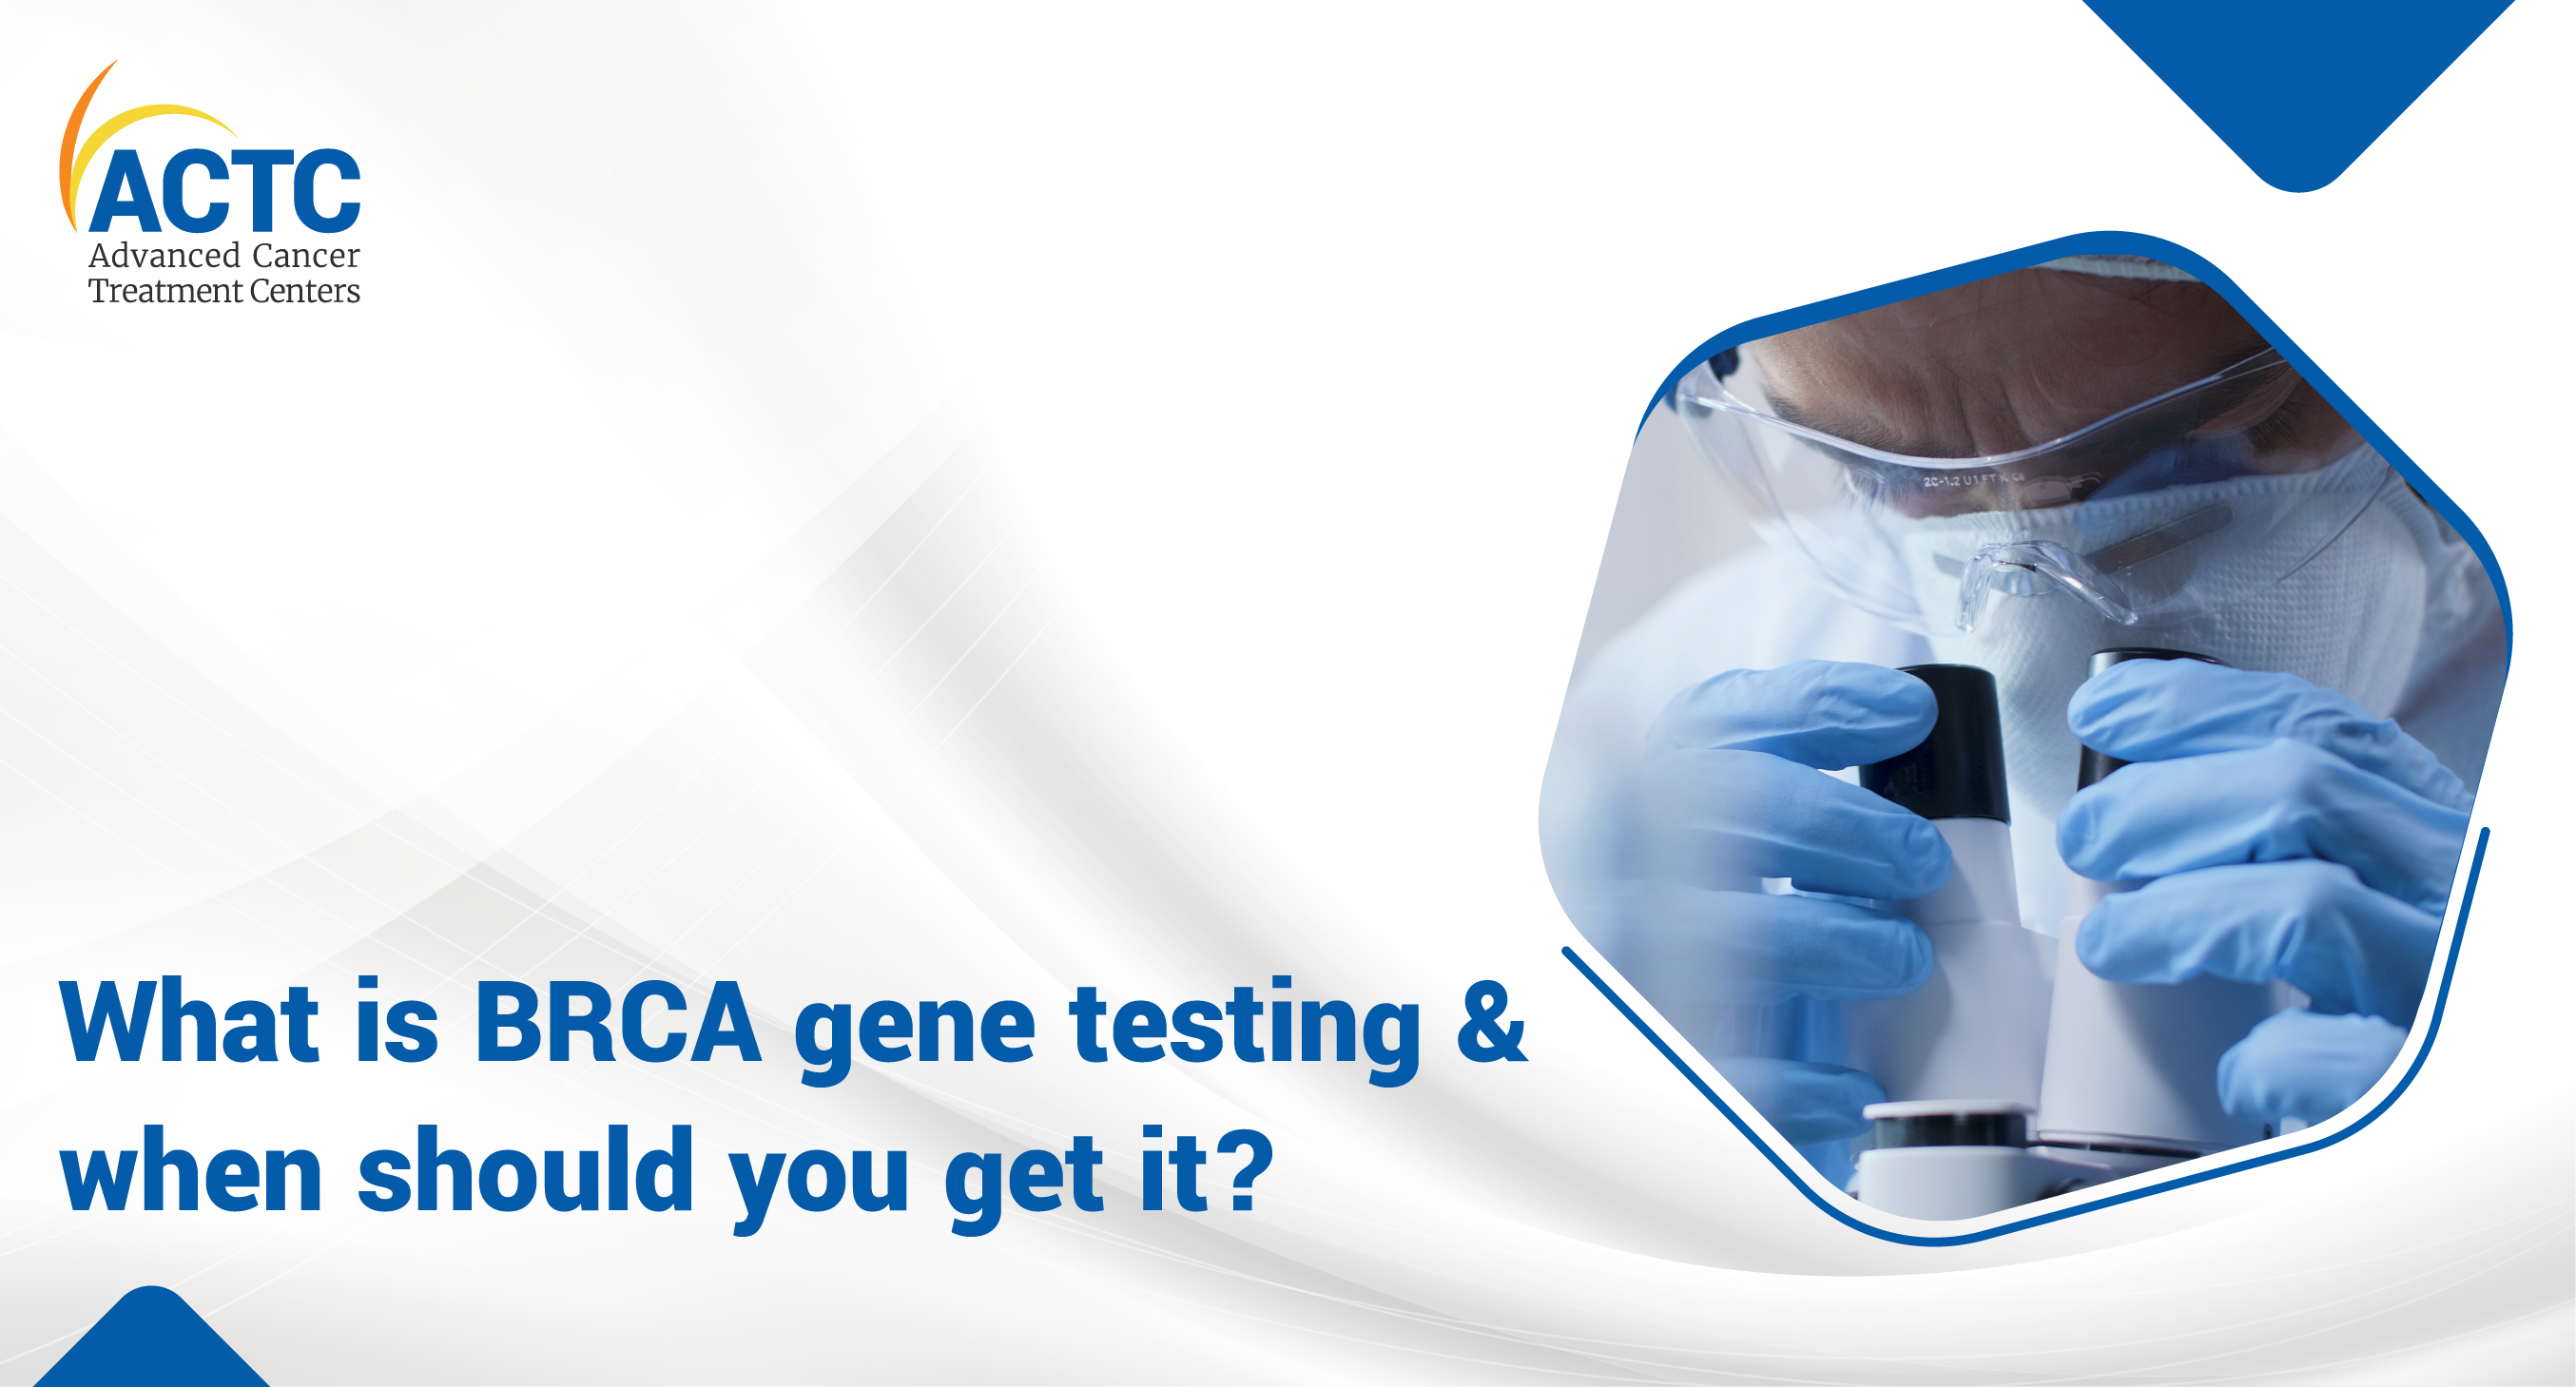 What is BRCA gene testing and when should you get it